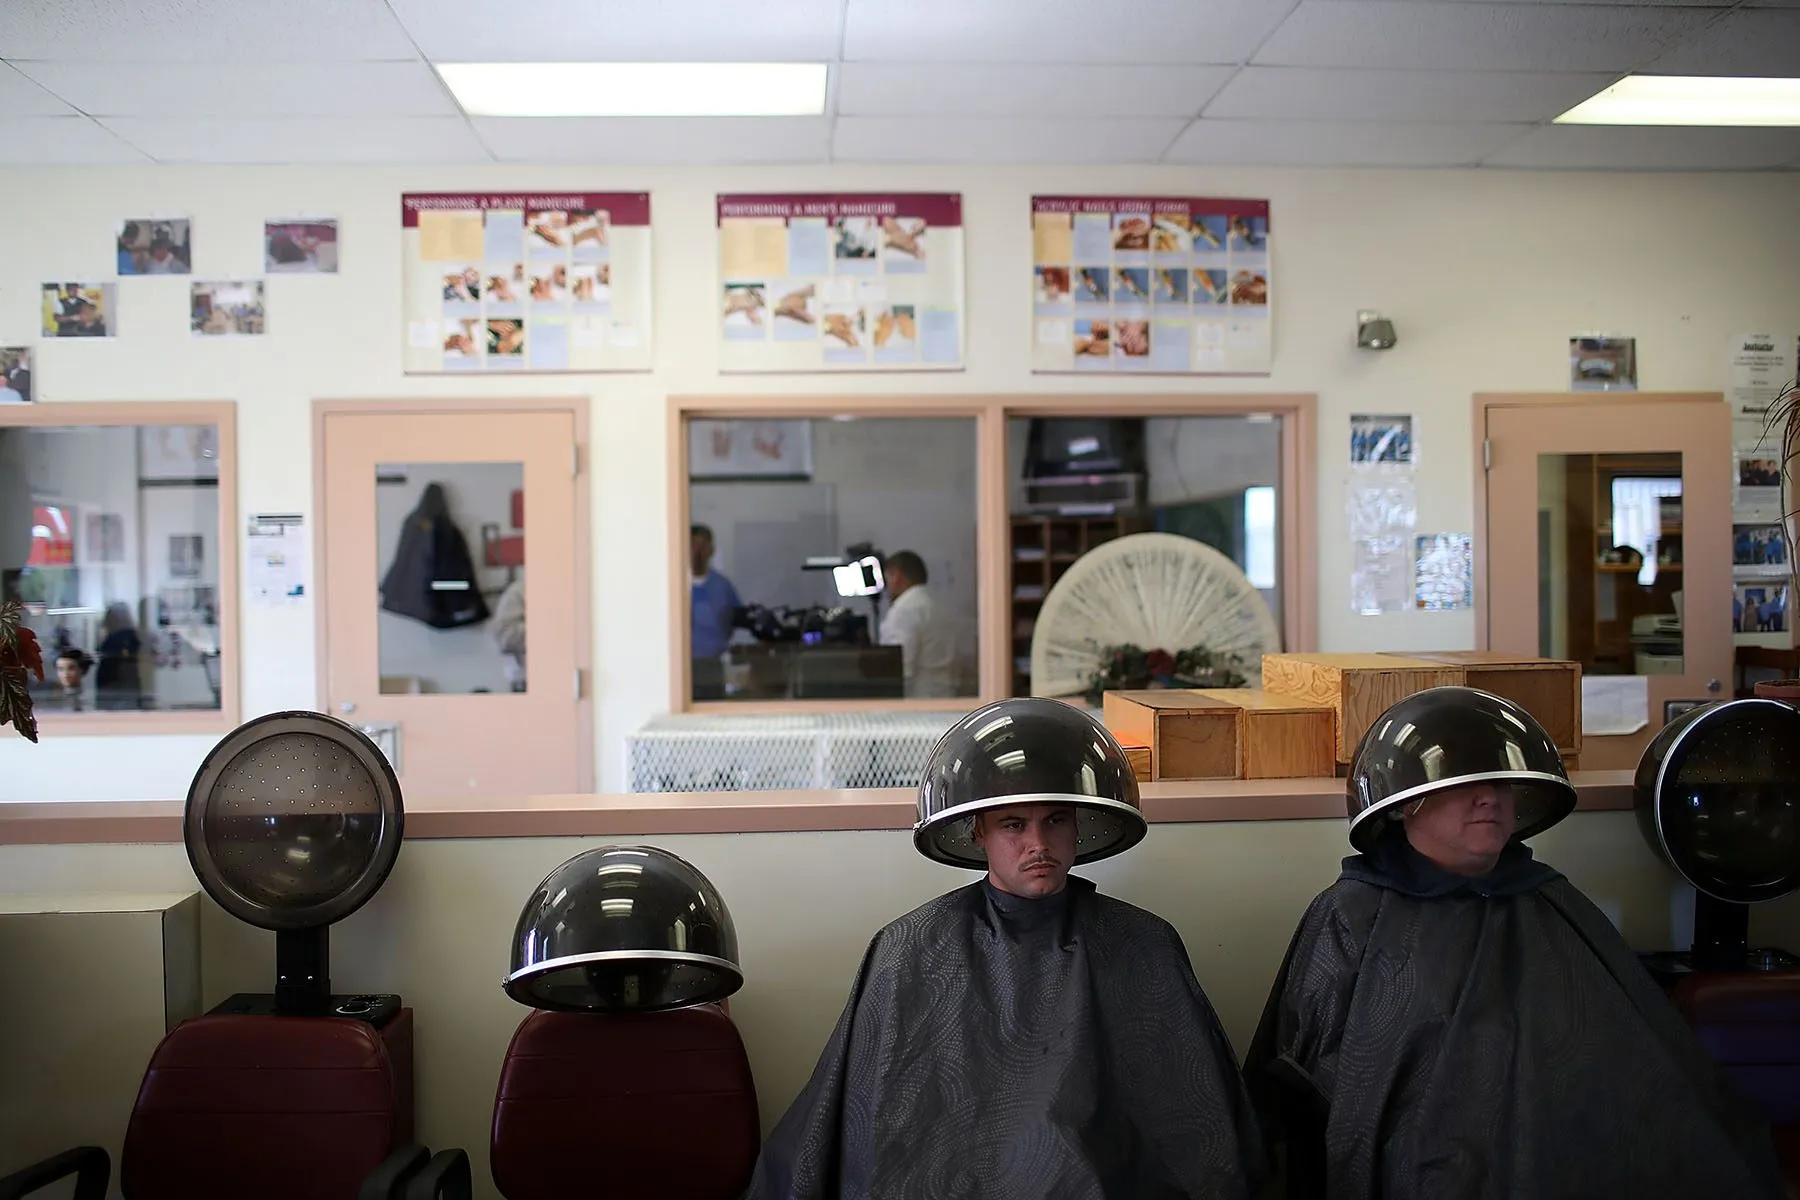 Inmates sit under hood dryers during a cosmetology class.